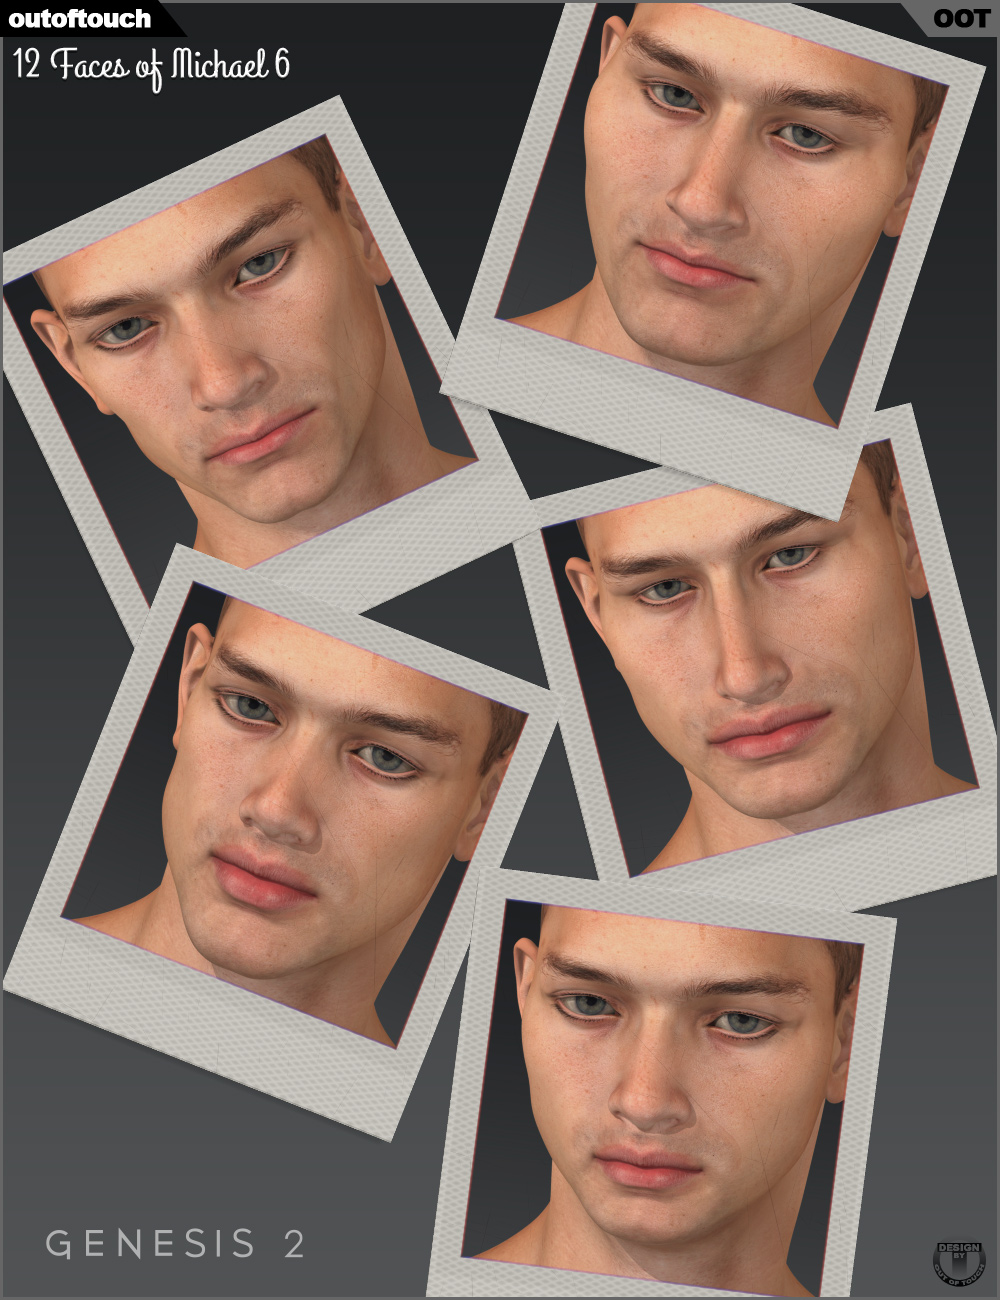 12 Faces of Michael 6 by: outoftouch, 3D Models by Daz 3D